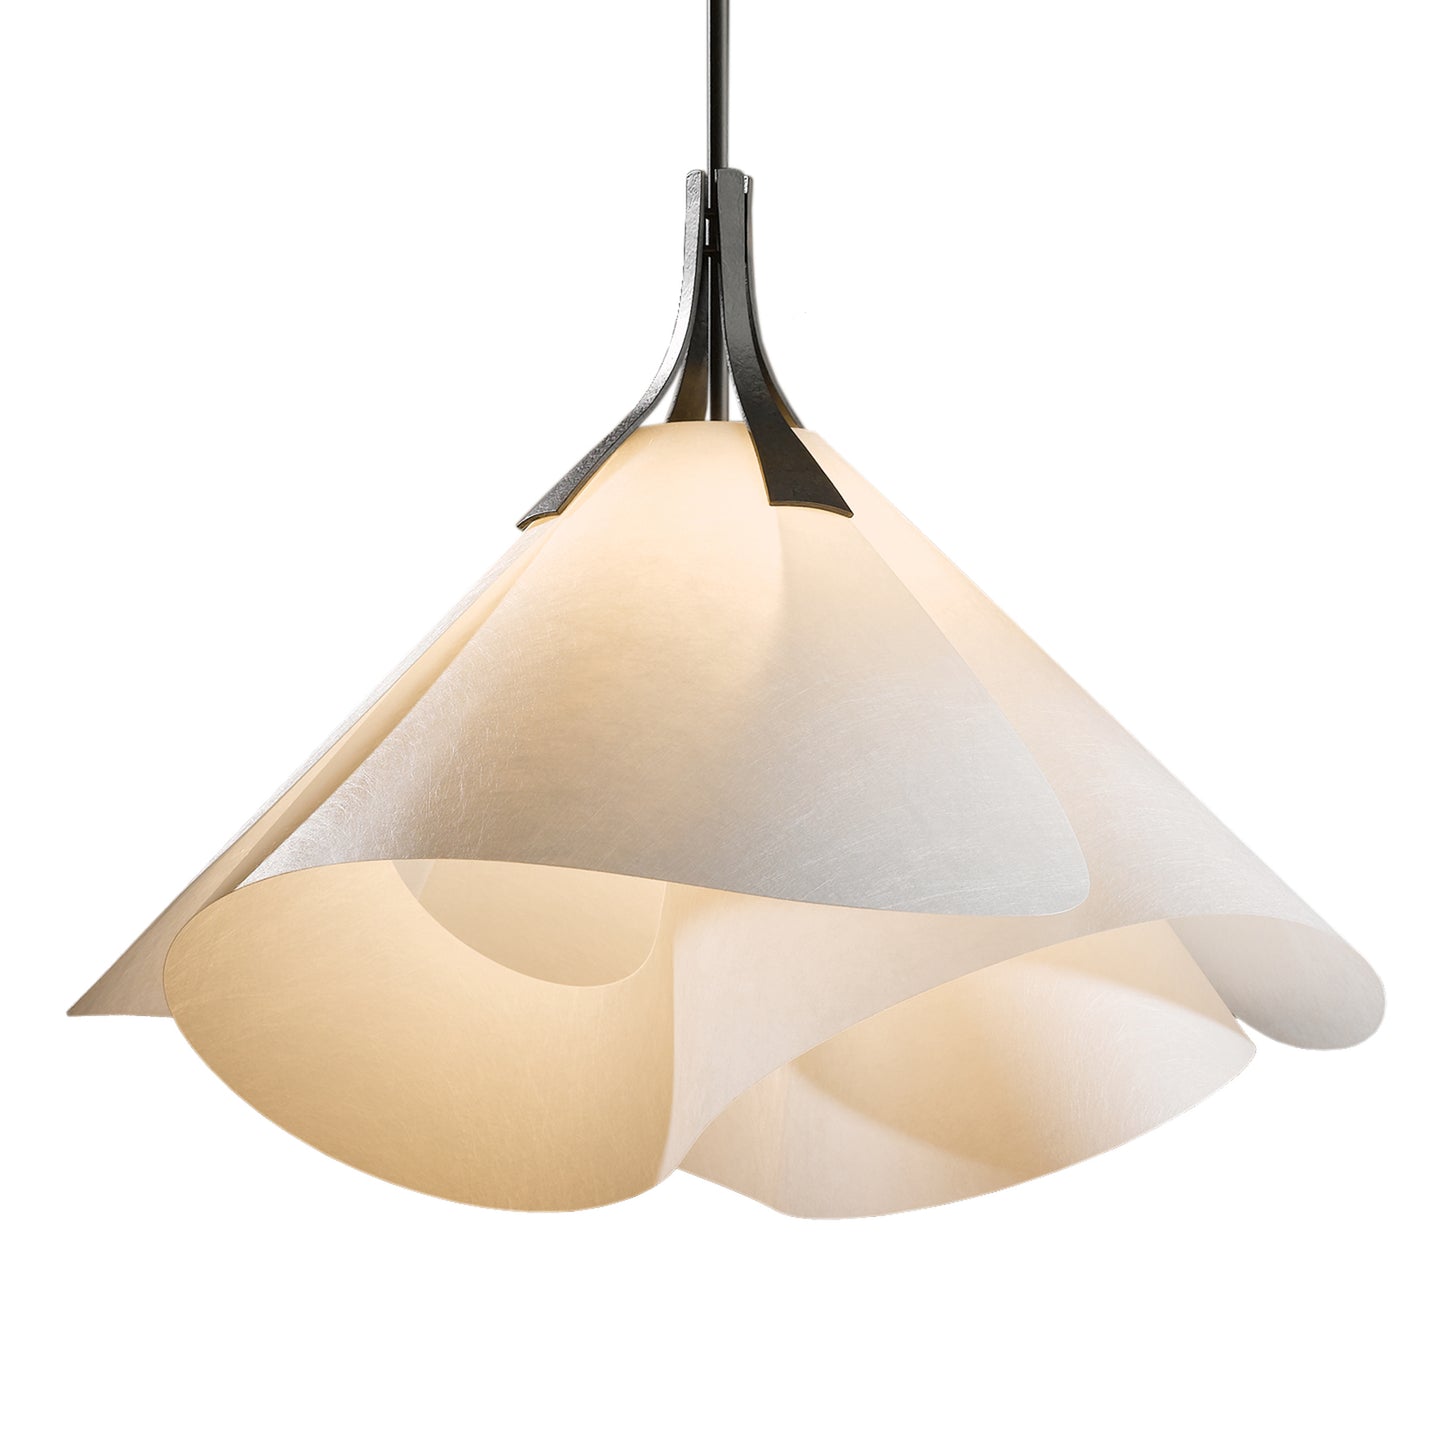 A modern pendant light with a Hubbardton Forge Mobius Large Pendant, inspired by the beautiful and unique form of the Mobius Strip.